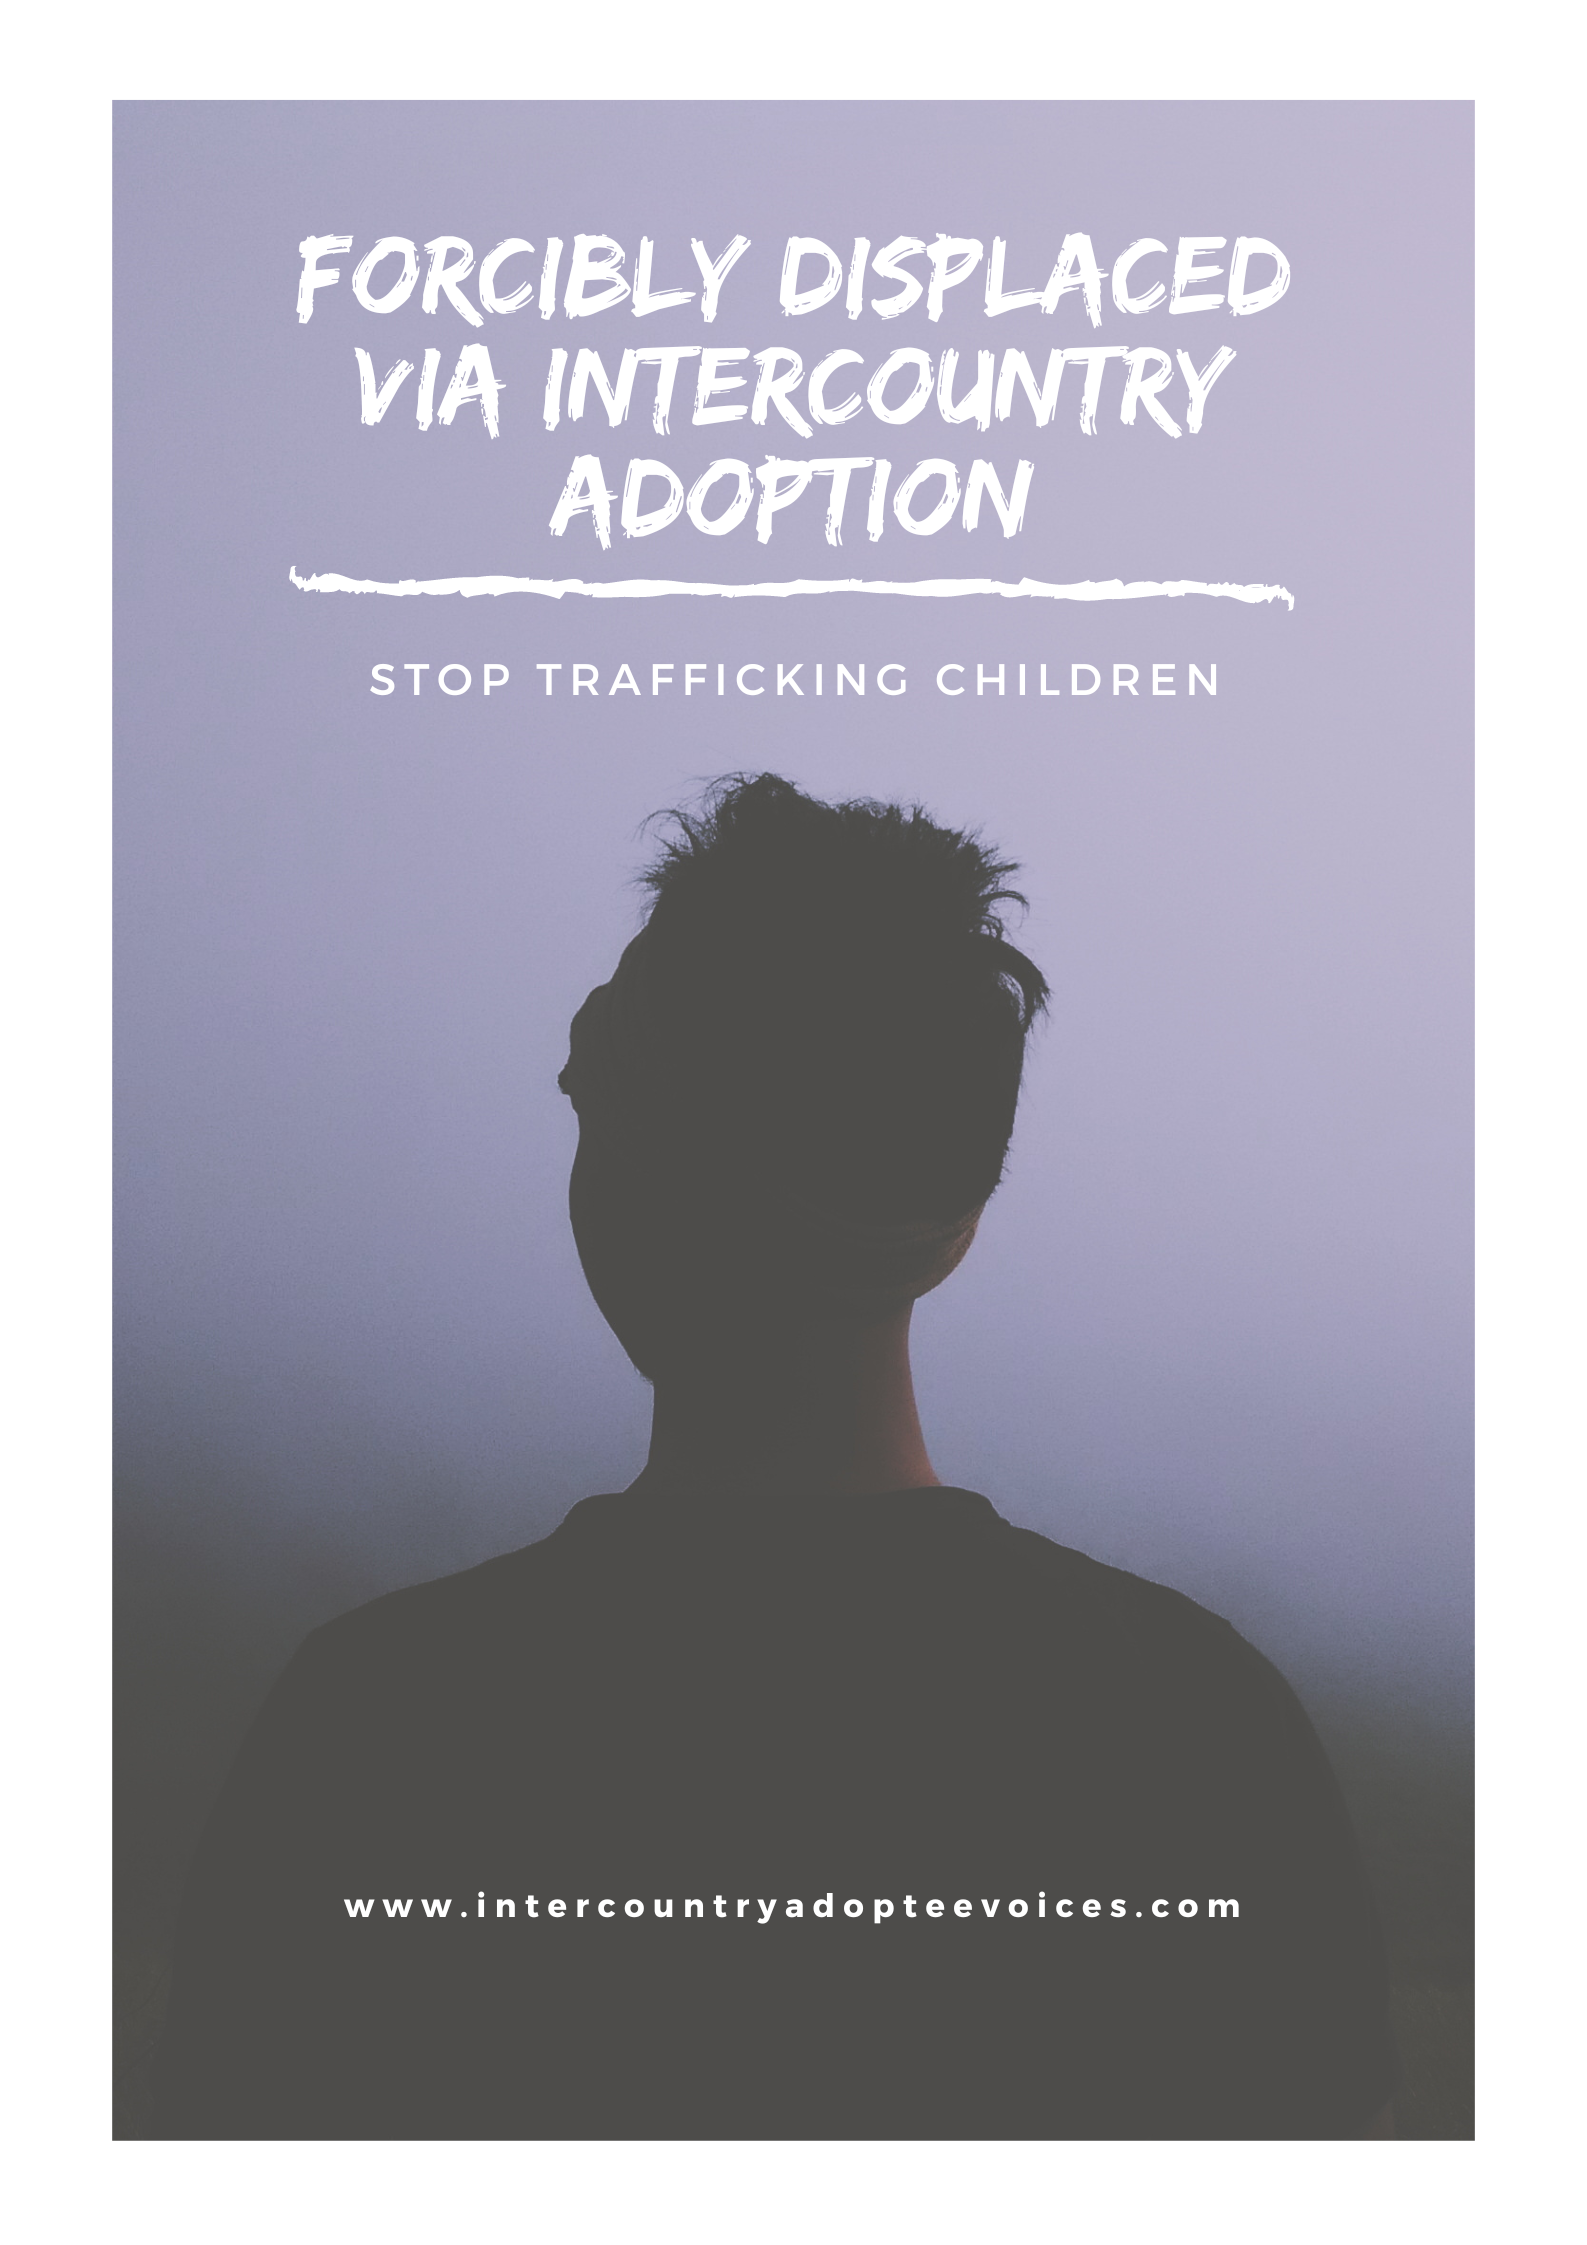 Degrees of Being Trafficked in Intercountry Adoption